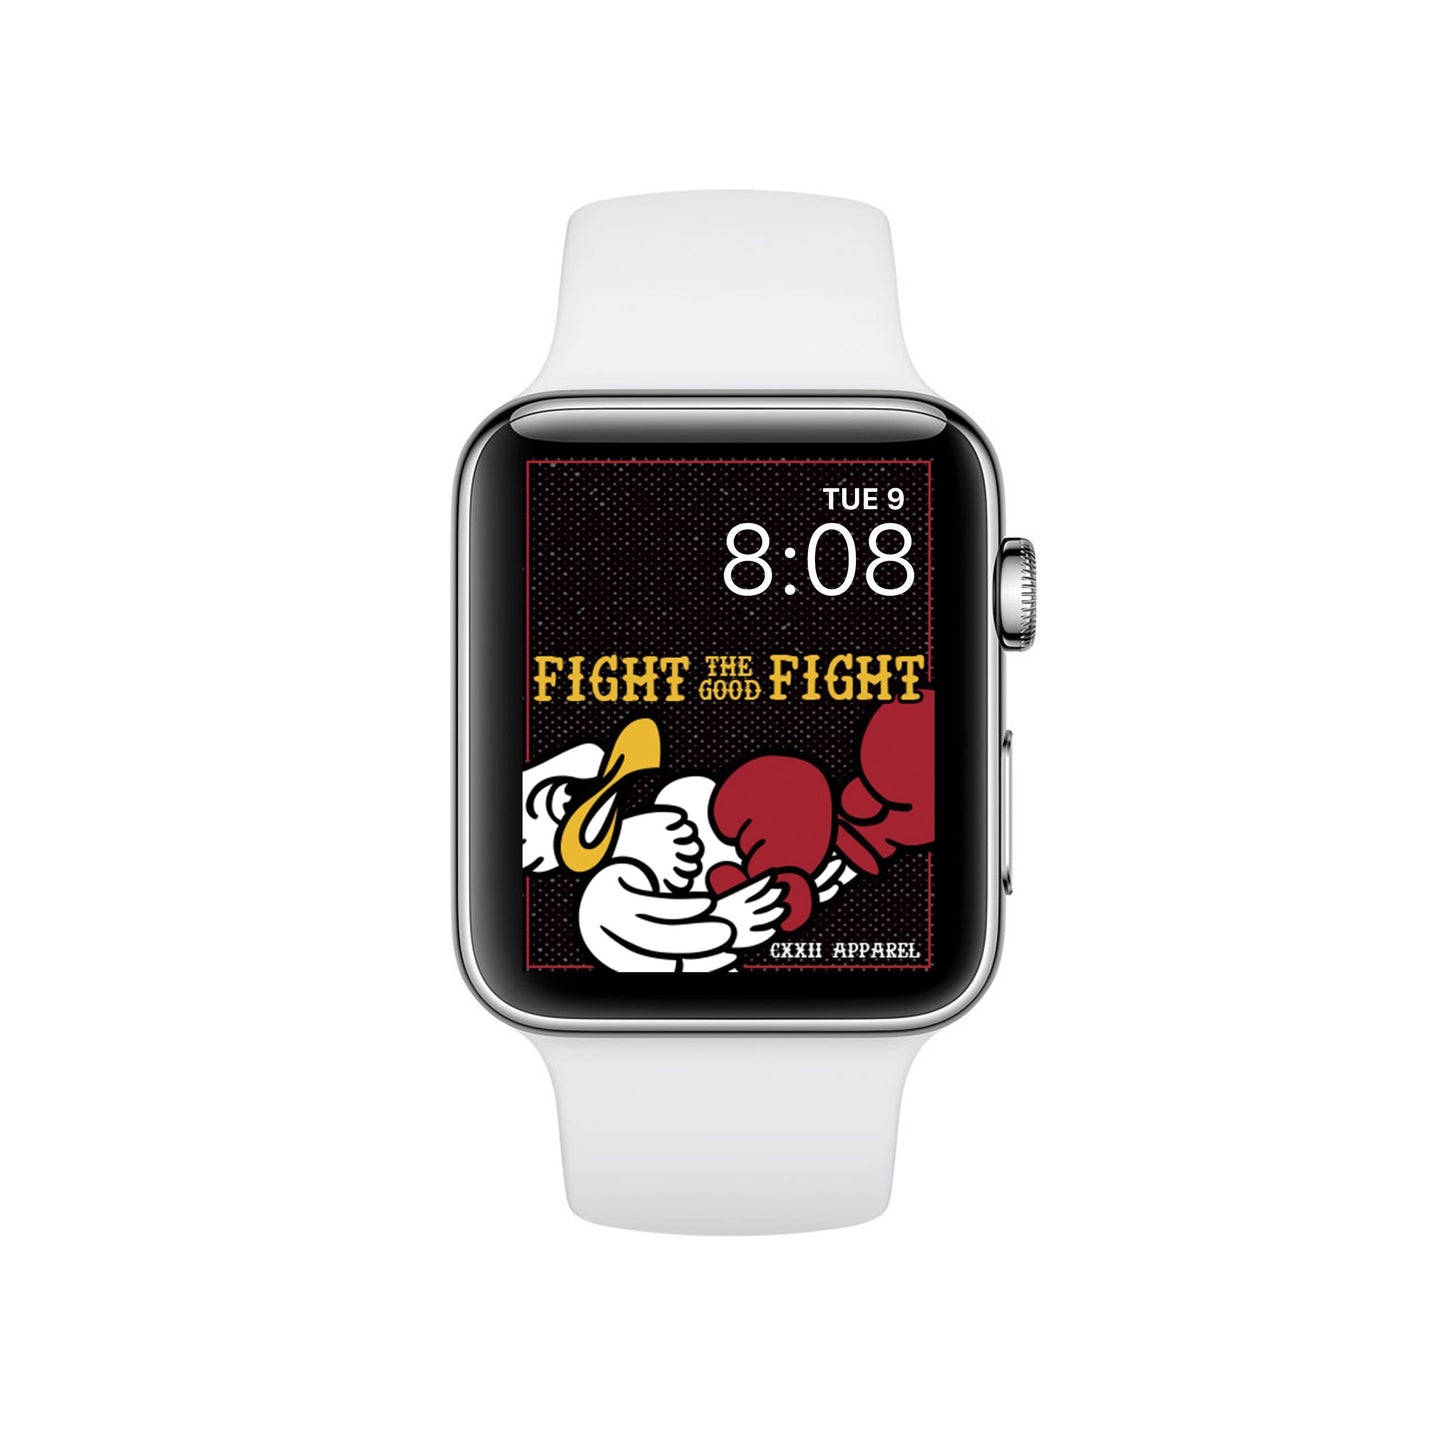 CXXII "Fight the Good Fight" Apple Watch Background